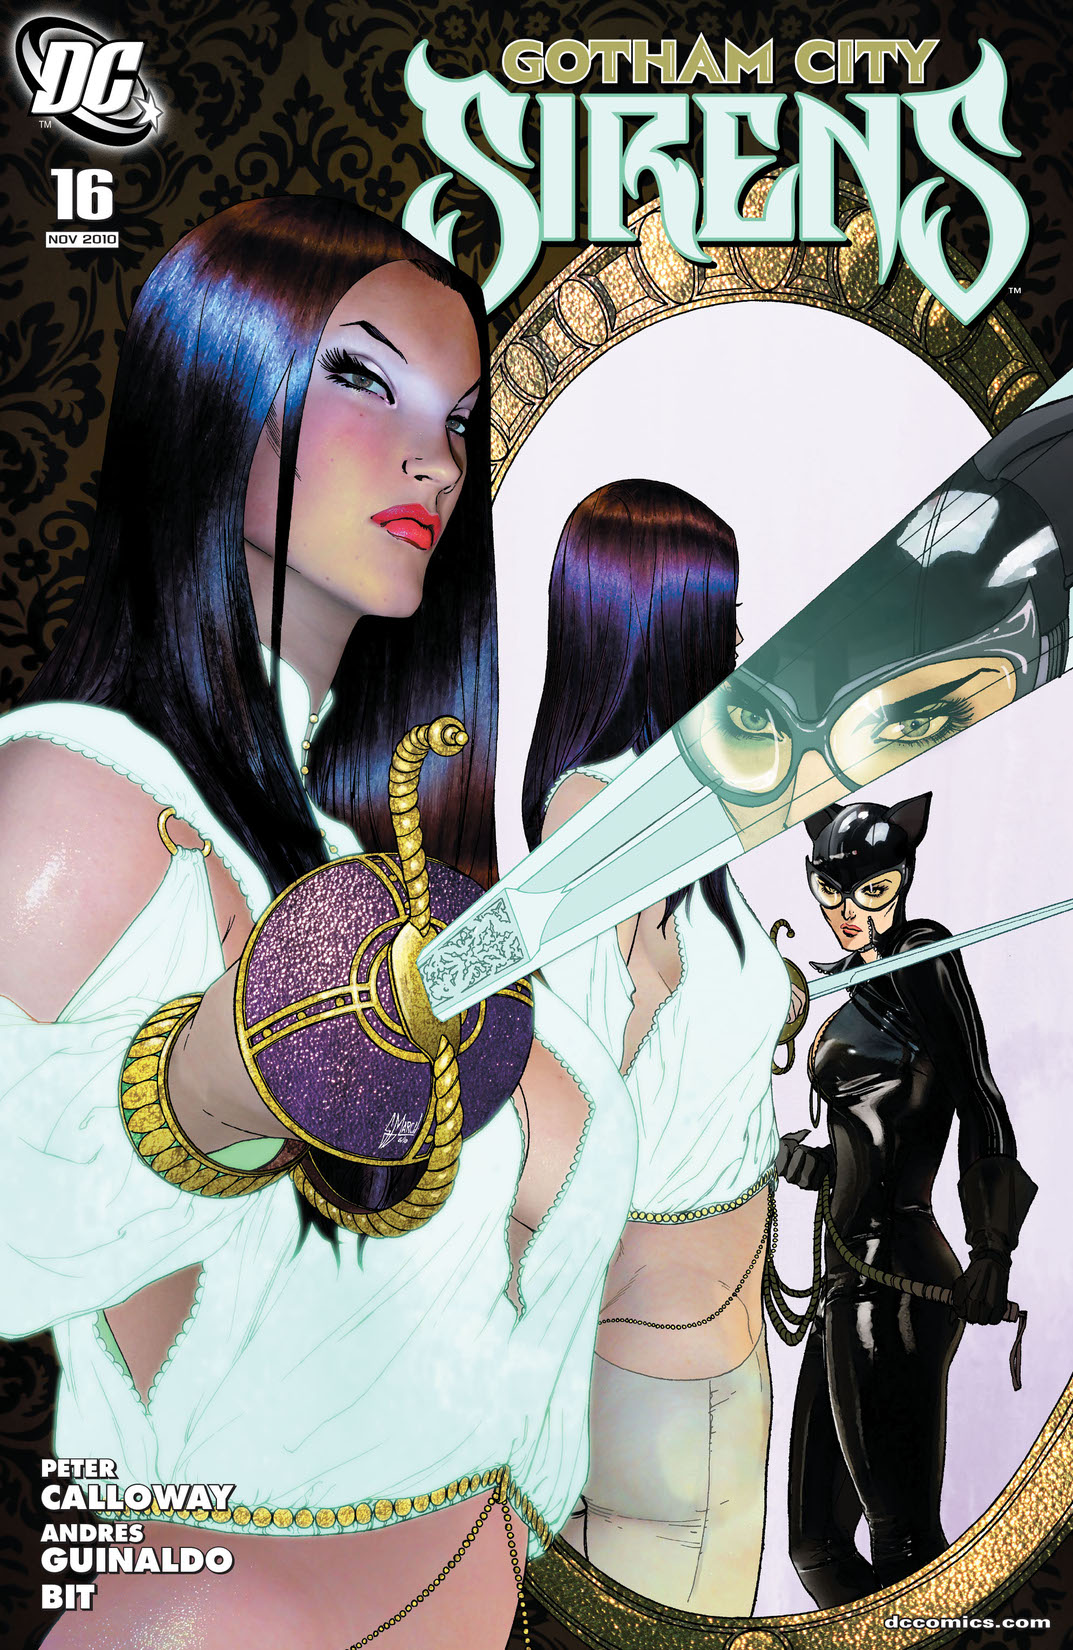 Gotham City Sirens #16 preview images